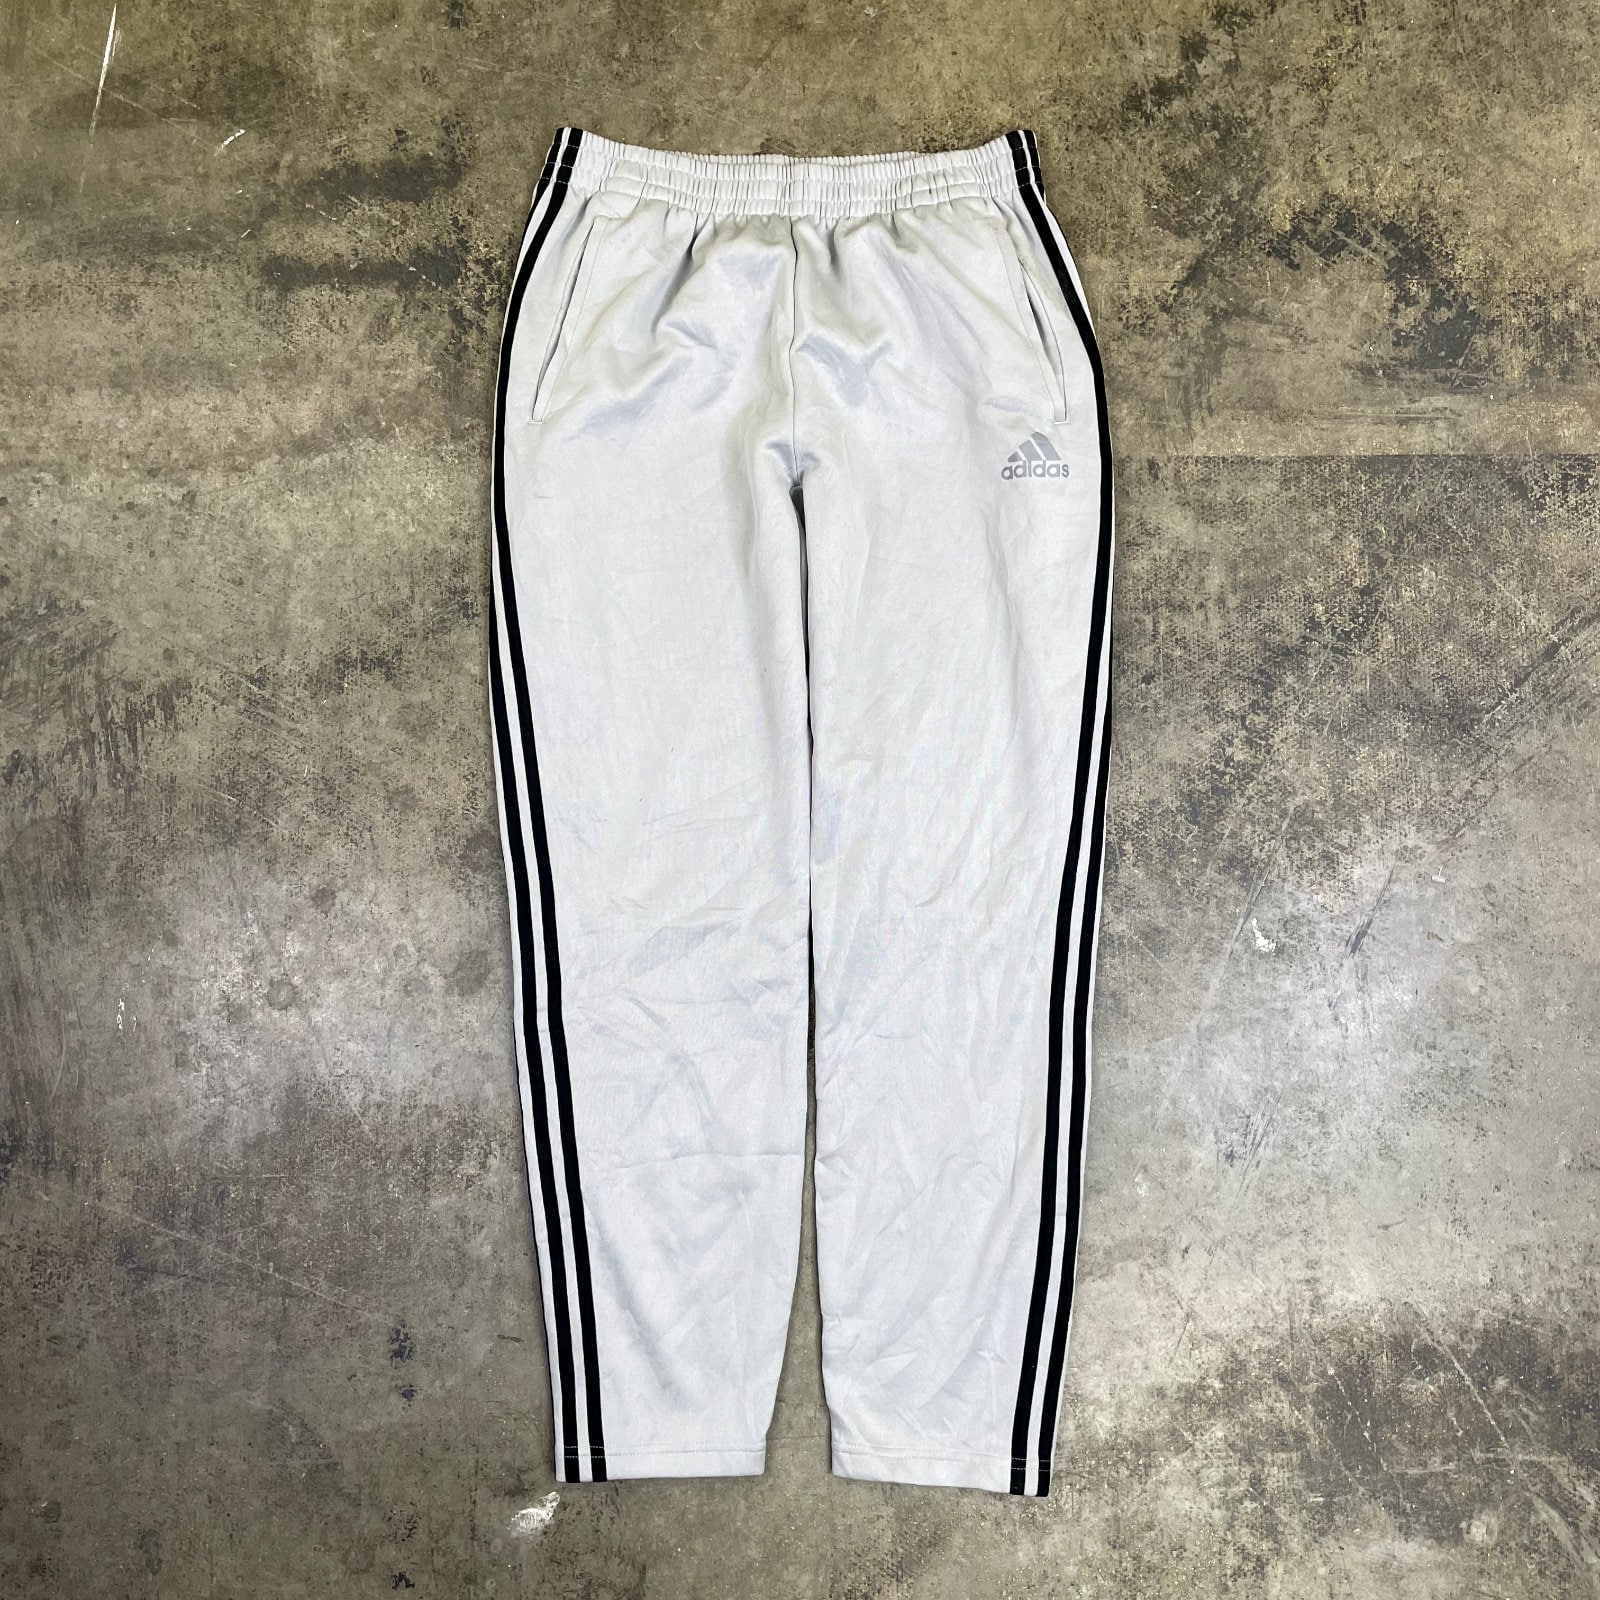 adidas Originals Adibreak Side Popper Track Pants  Where To Buy  IB7297   The Sole Supplier